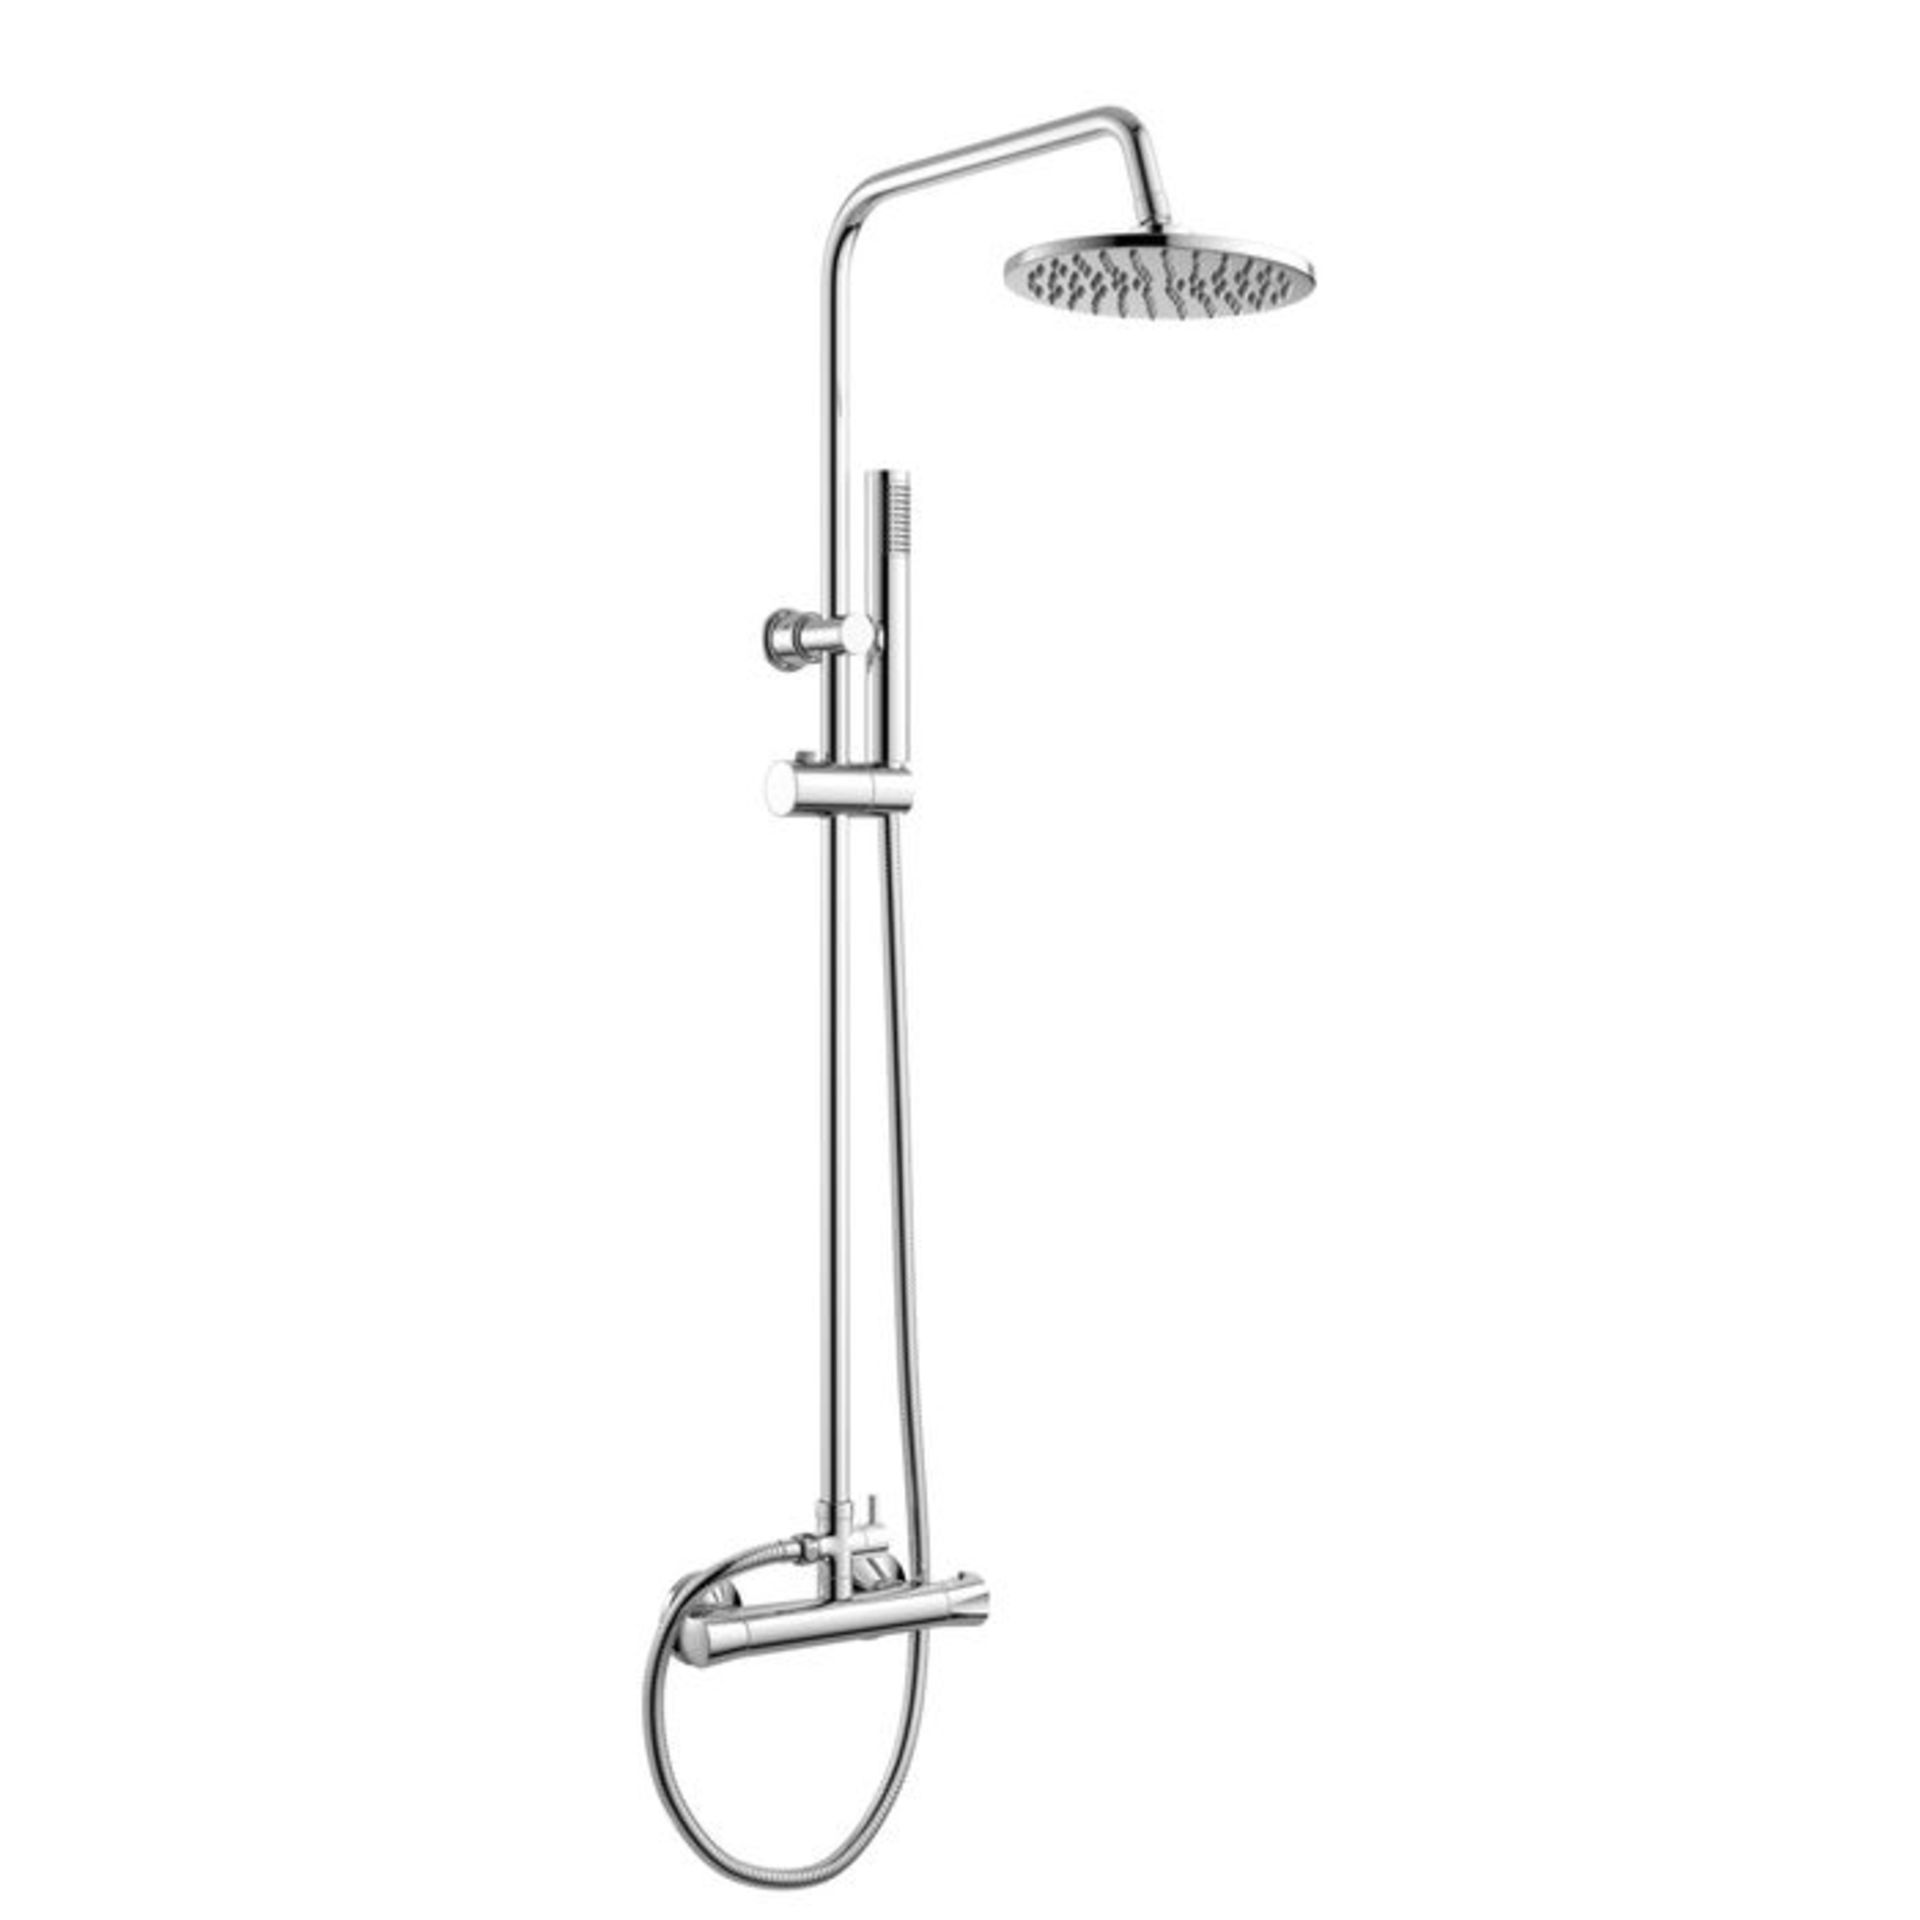 (CT154) Round Exposed Thermostatic Shower Kit & Head. Shower head features a tilt action for maximum